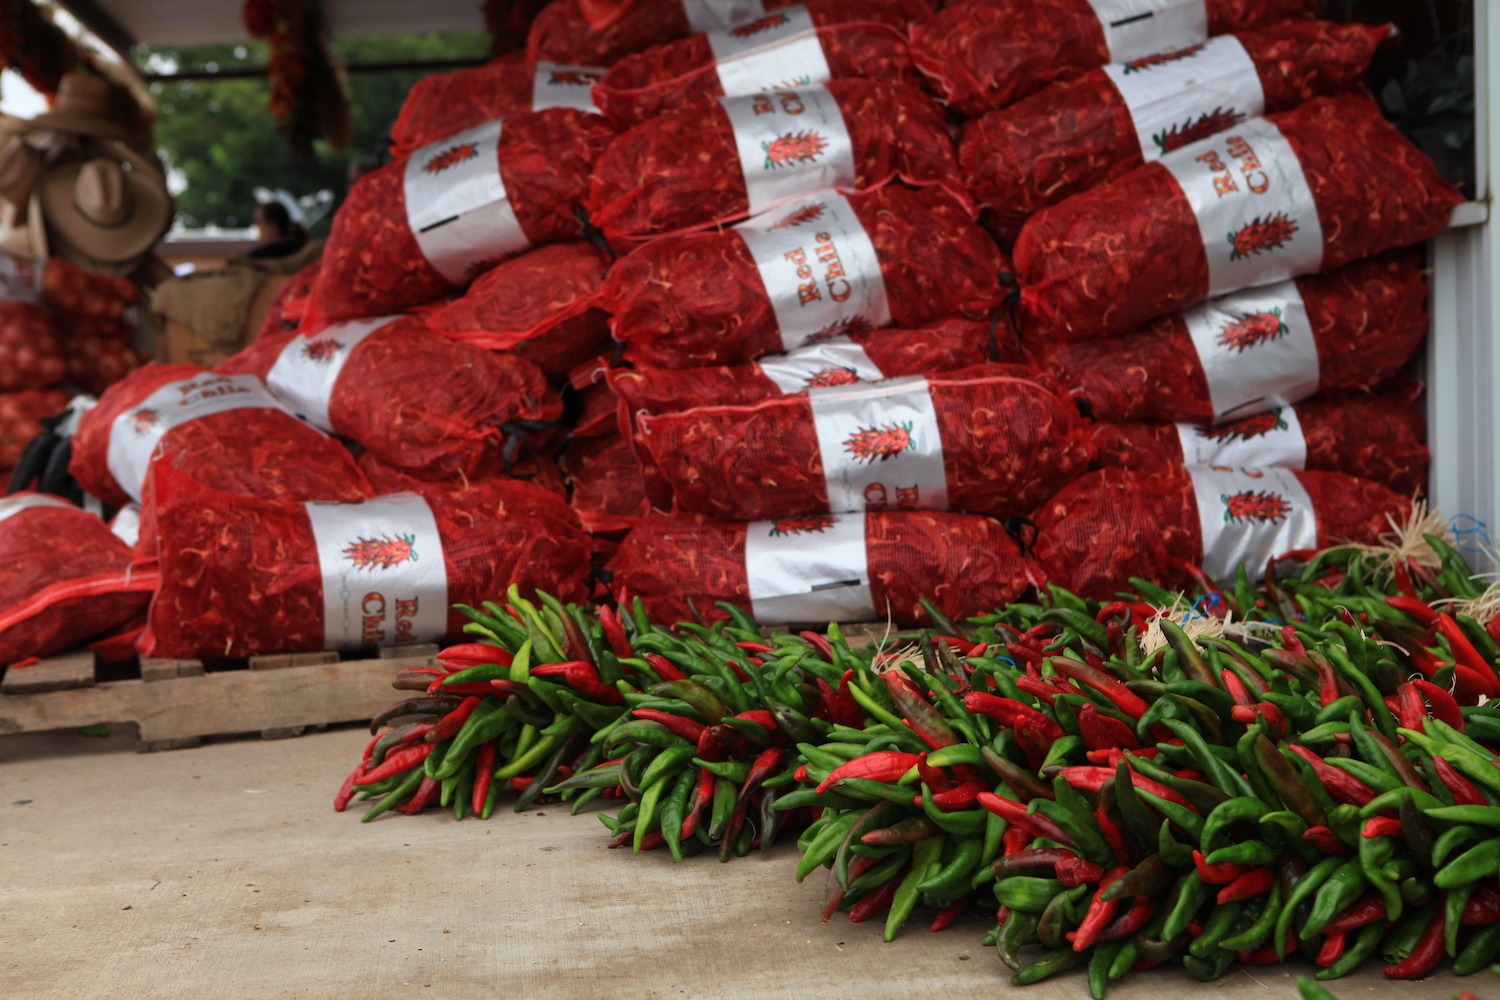 Chiles are piled up during the annual Hatch Chile Festival.